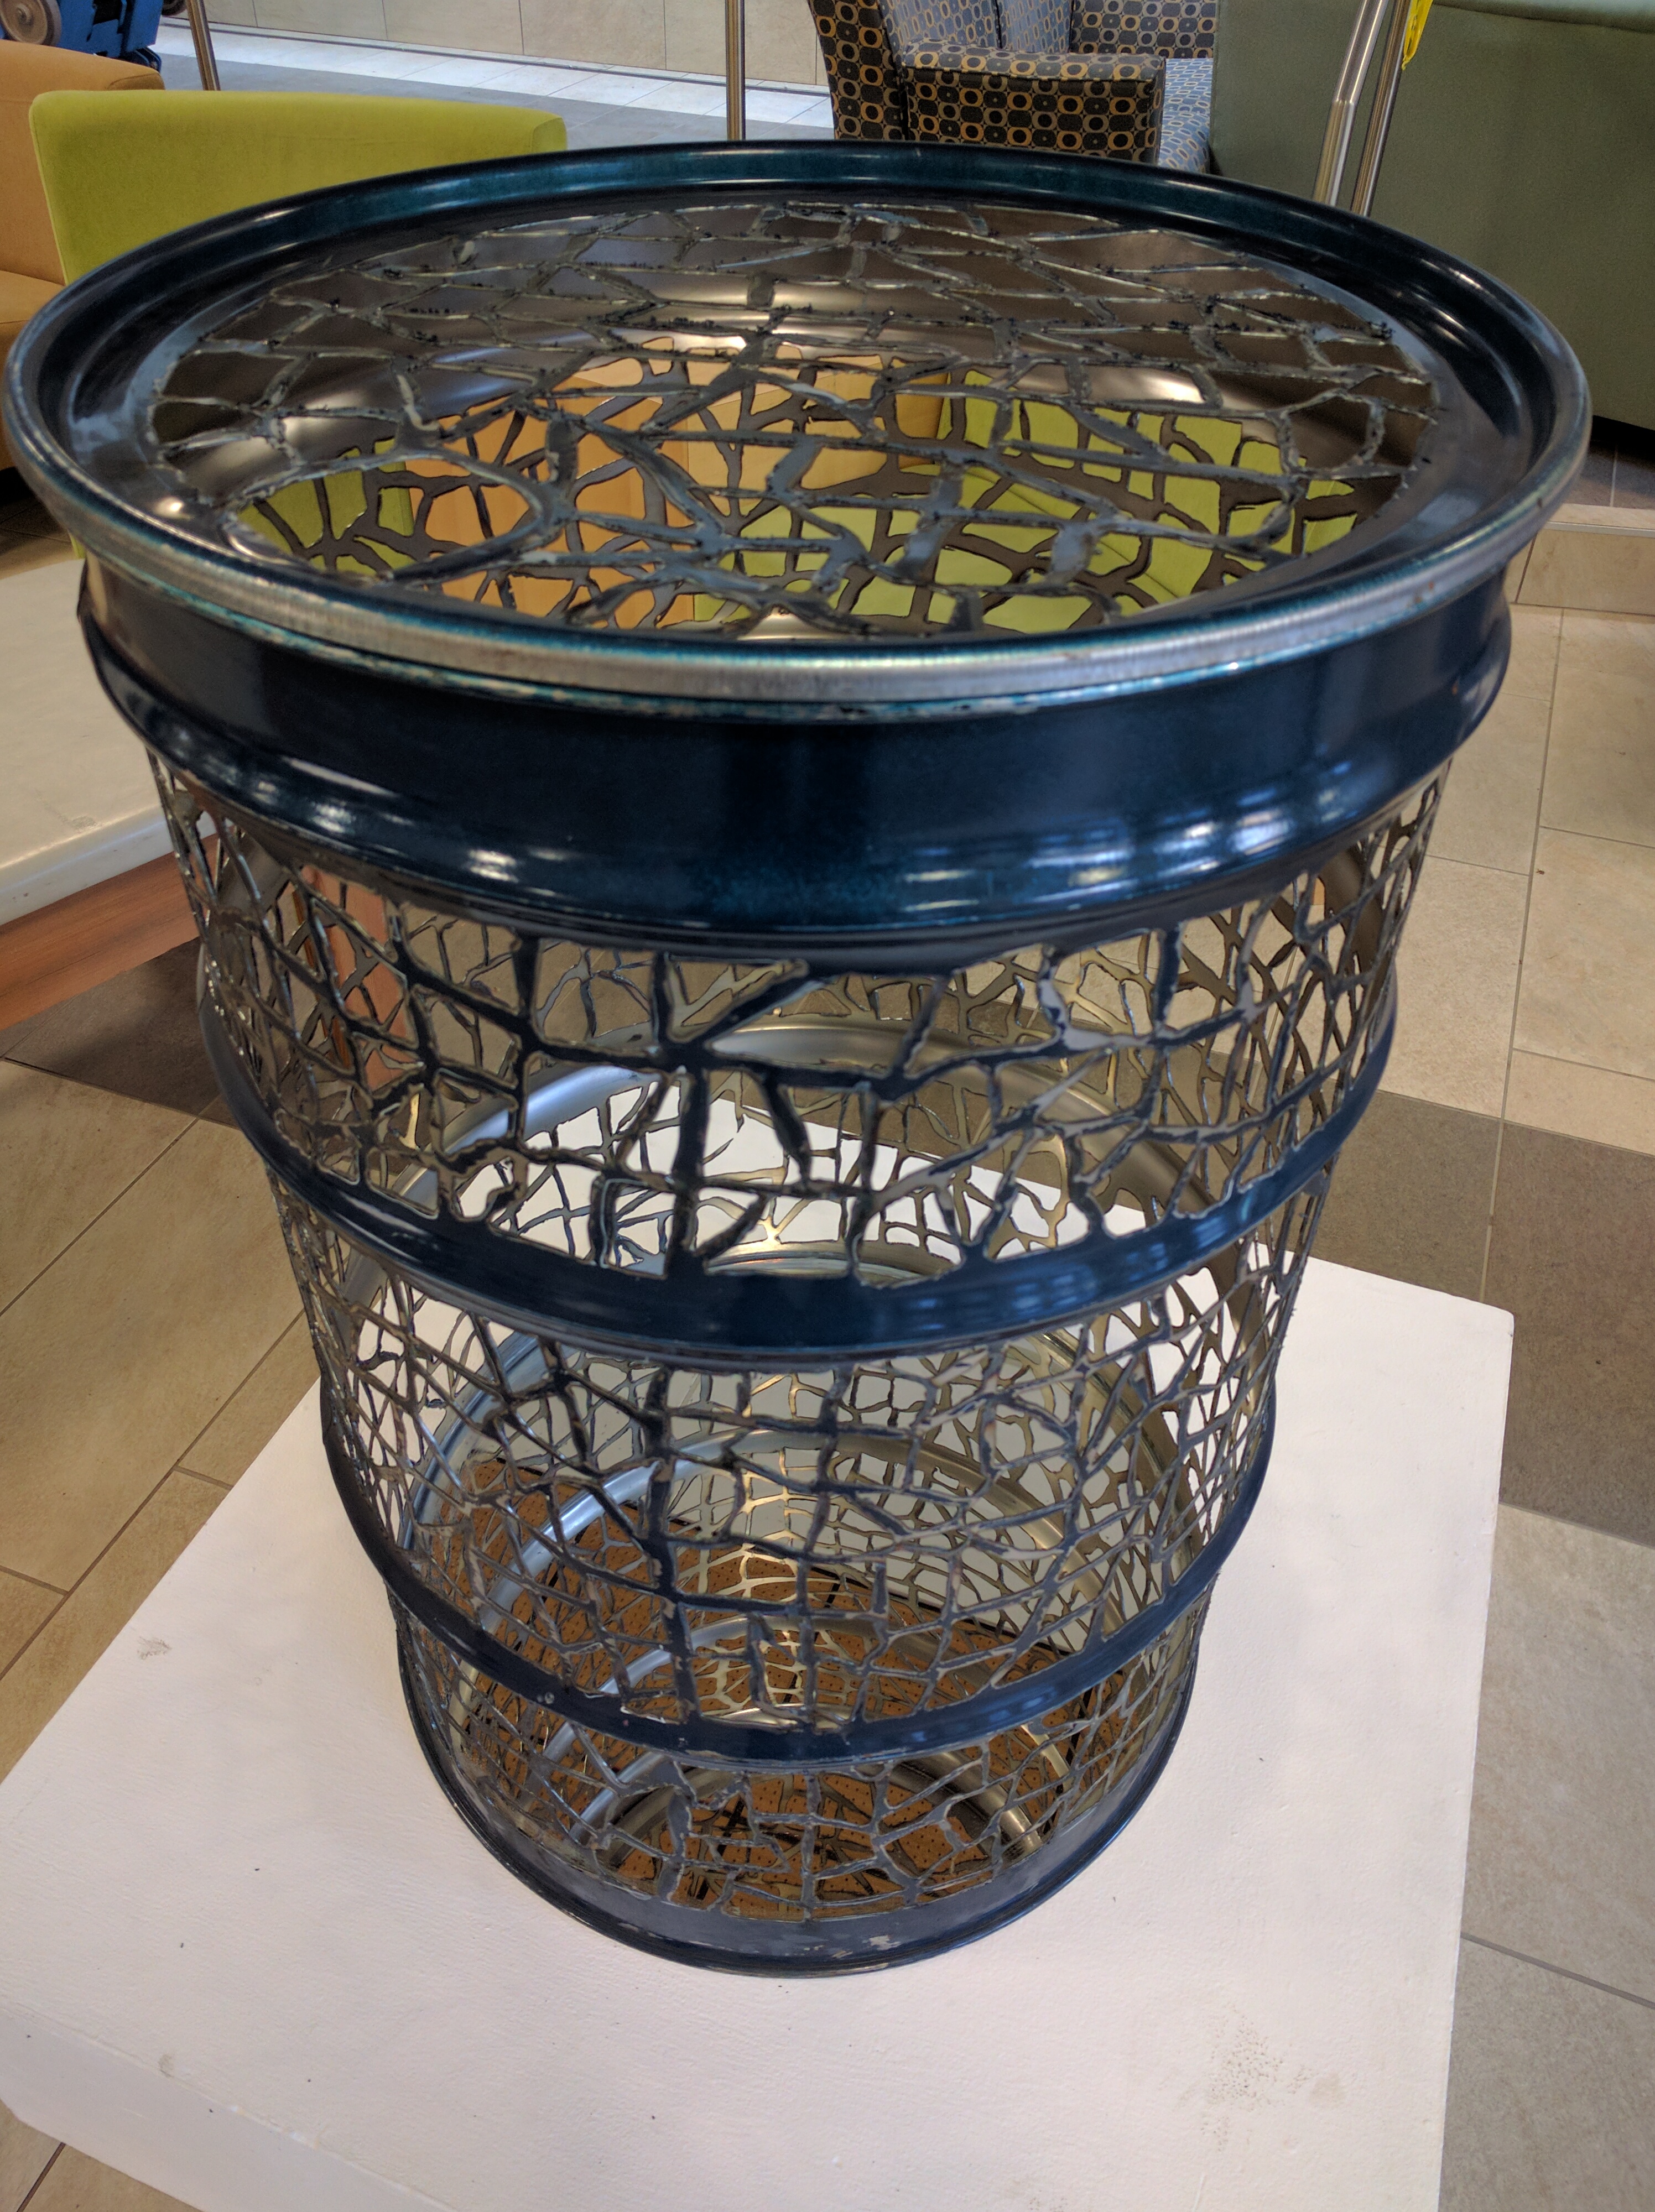 An intricately laser cut waste barrel made by Dani Dale